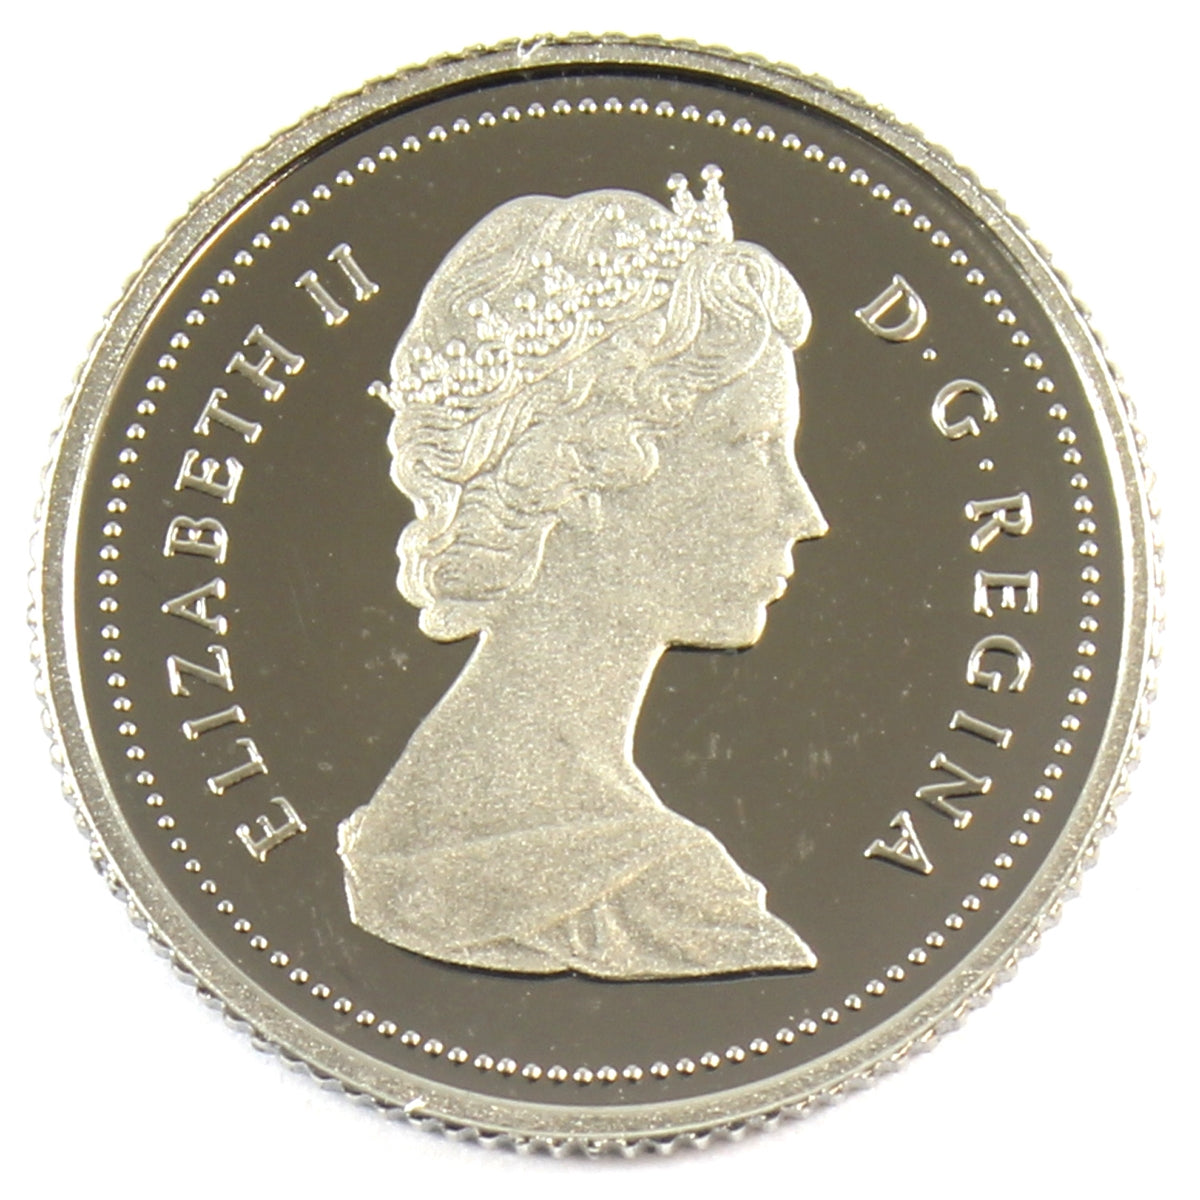 1985 Canada 10-cent Proof